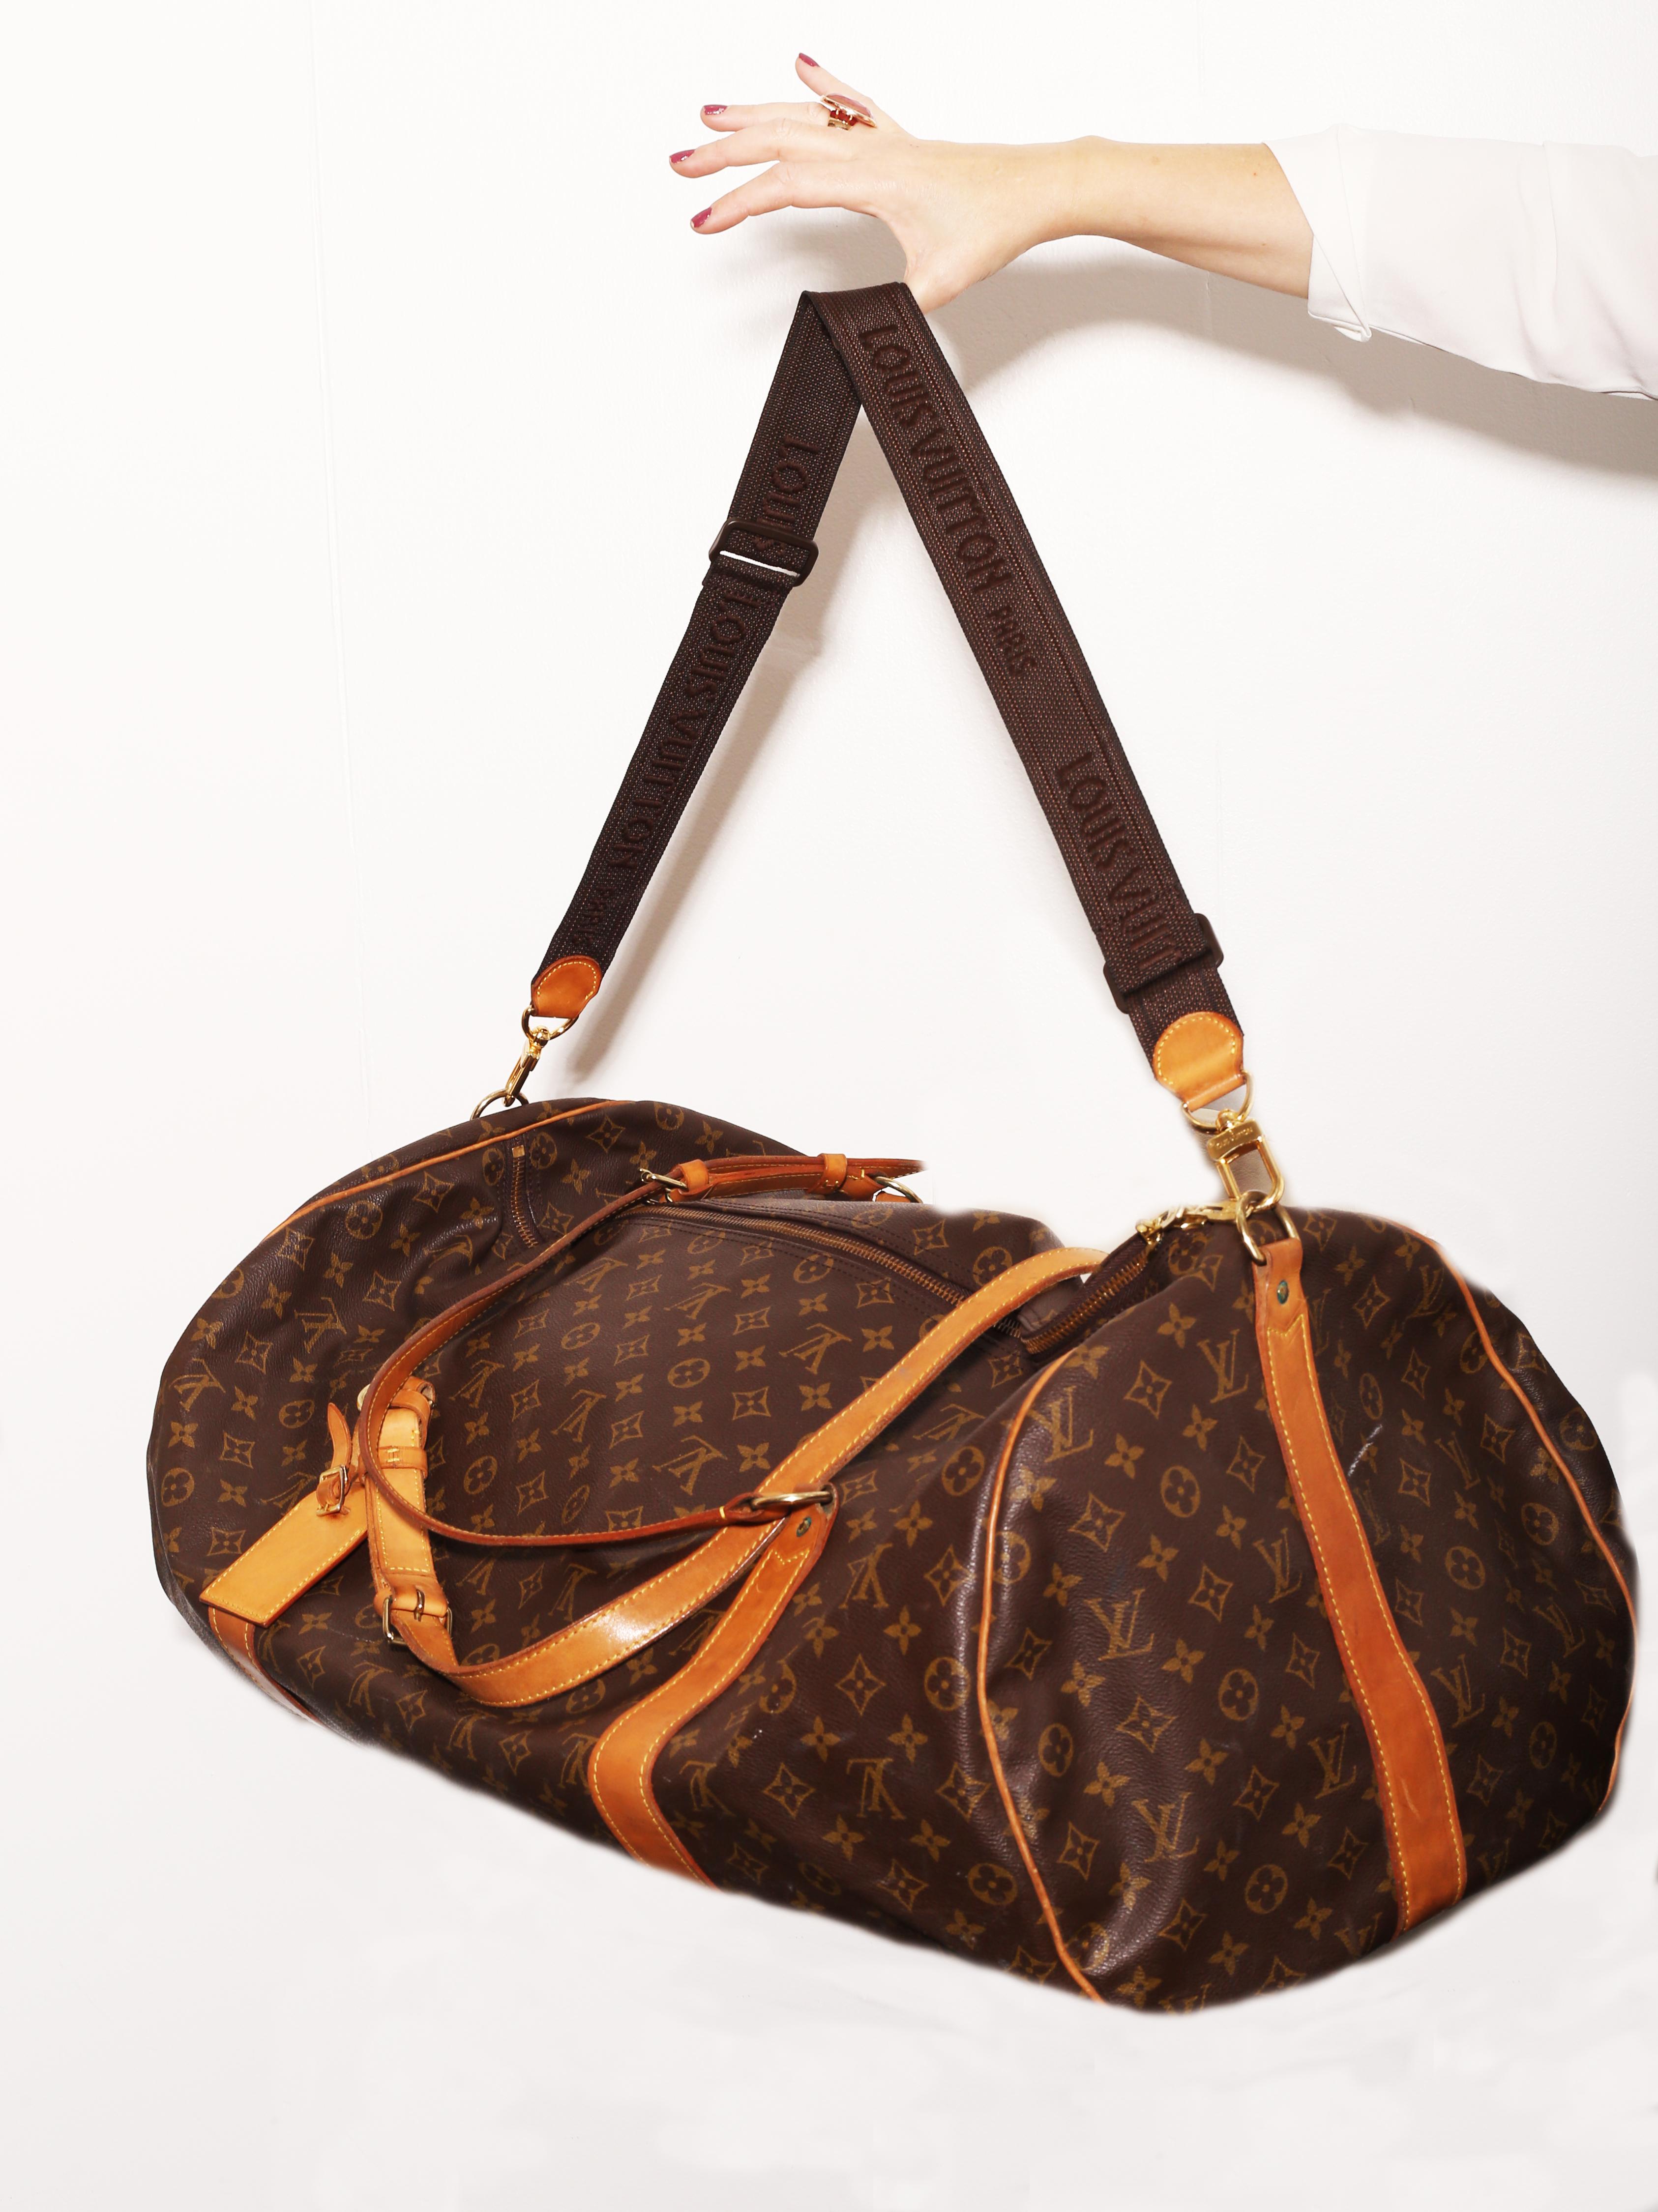 35x65x36
Louis Vuitton Keepall Bandouliere Bag Monogram Canvas 65

Condition
Very good. Moderate darkening, scuffs on handle and leather trims, minor discoloration and wear in interior, scratches and tarnish on hardware.
Accessories: Poignet, Lock,